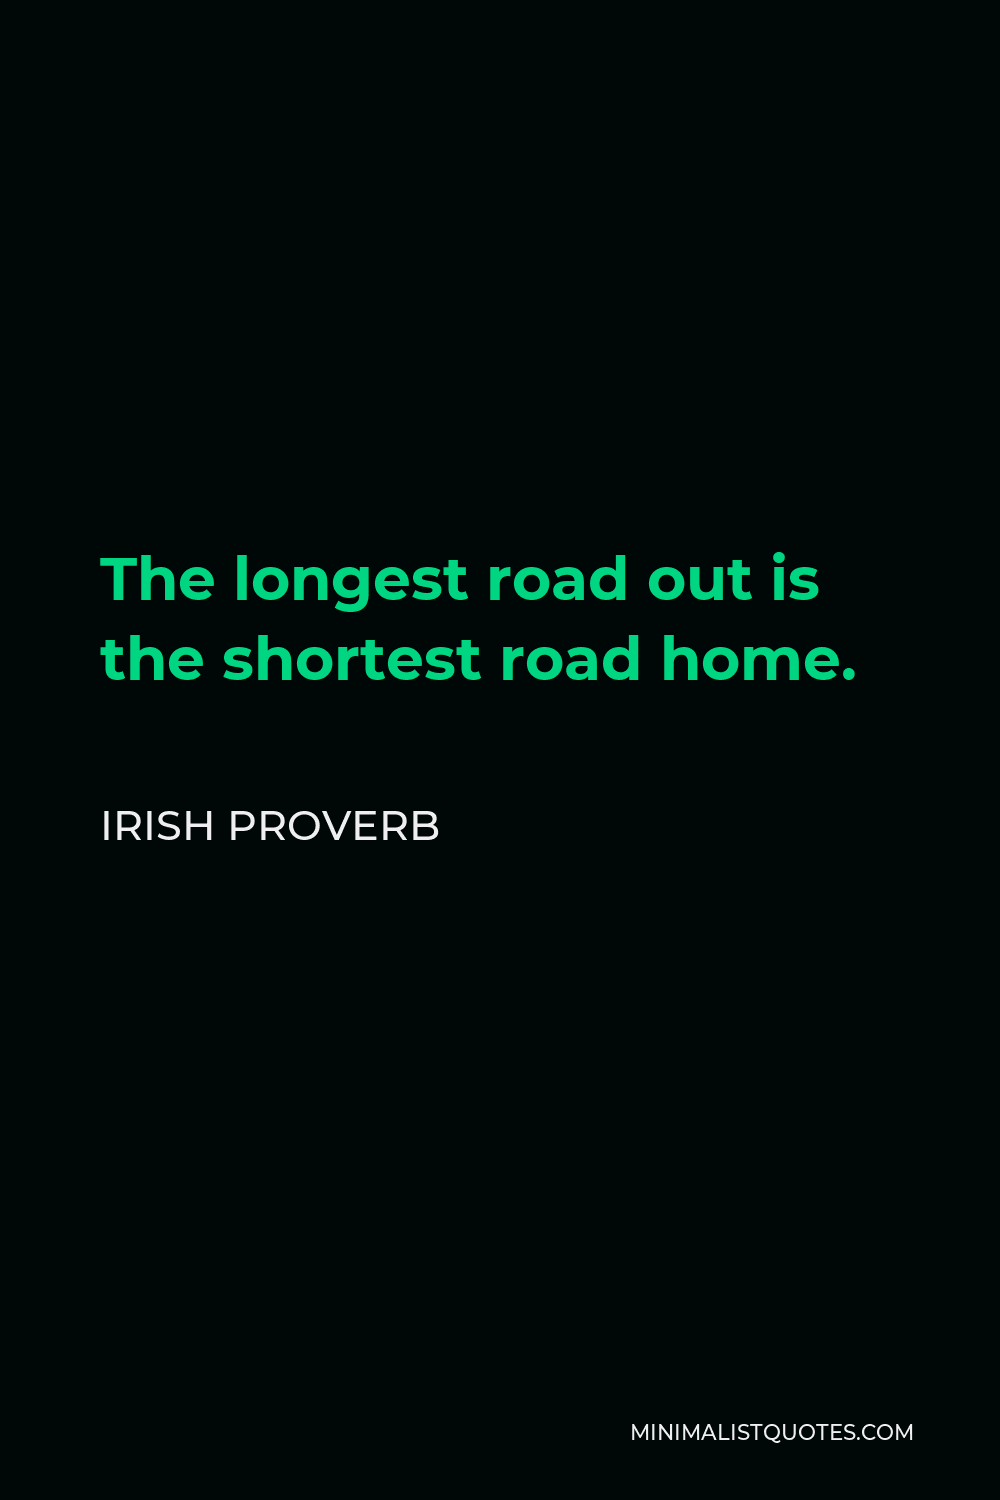 Irish Proverb Quote - The longest road out is the shortest road home.